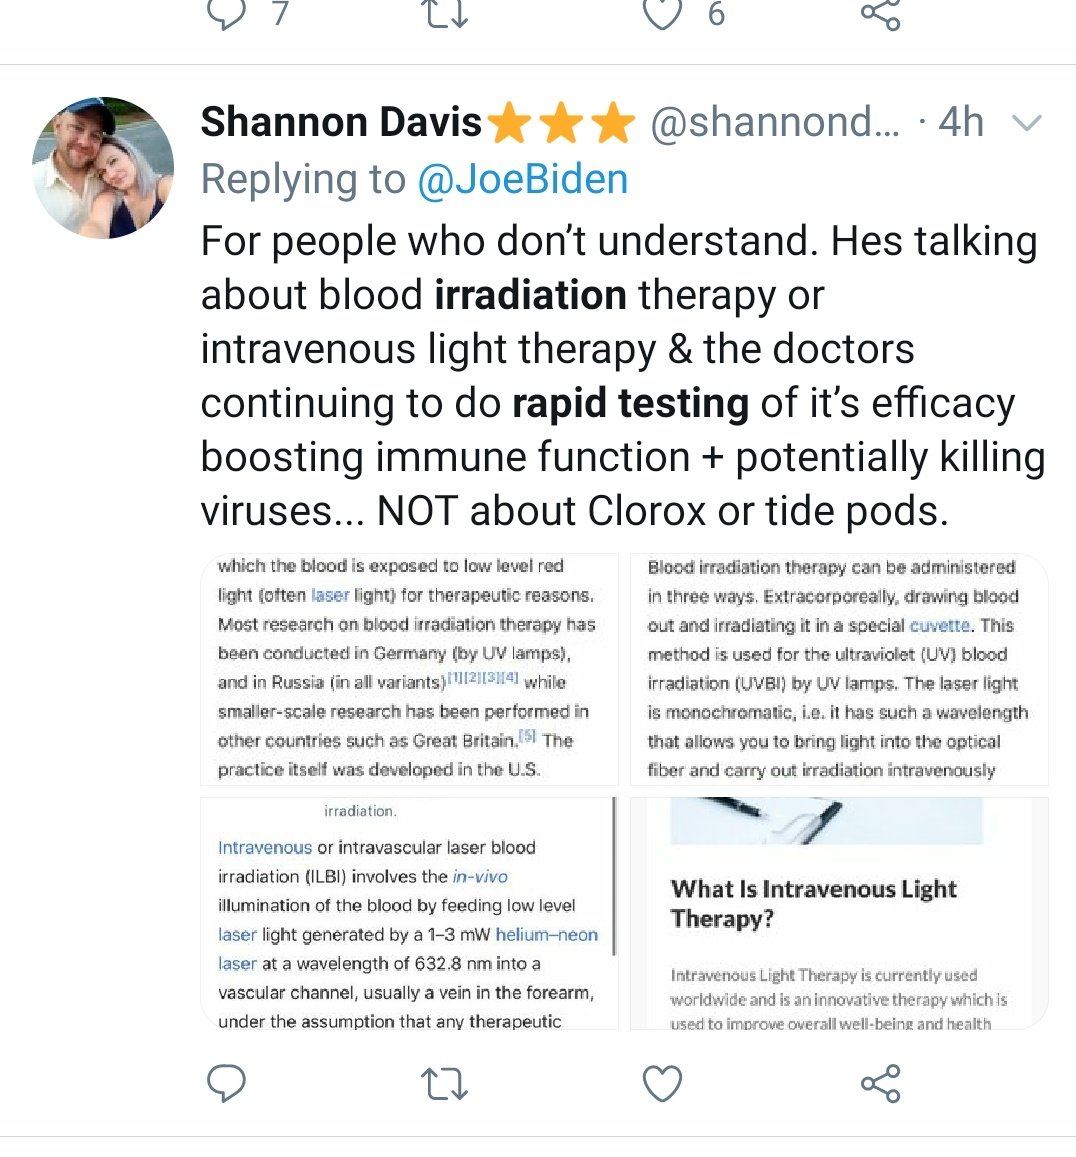 [Thread] 1/ Ahh the MAGA copy and paste crowd are trying to do damage limitation on Trump's disinfectant in lungs blunder. Look at all these near identical tweets. A hasty PR campaign, or sloppy Twitter usage? My hunch says the former...  #coronavirus  #Covid_19